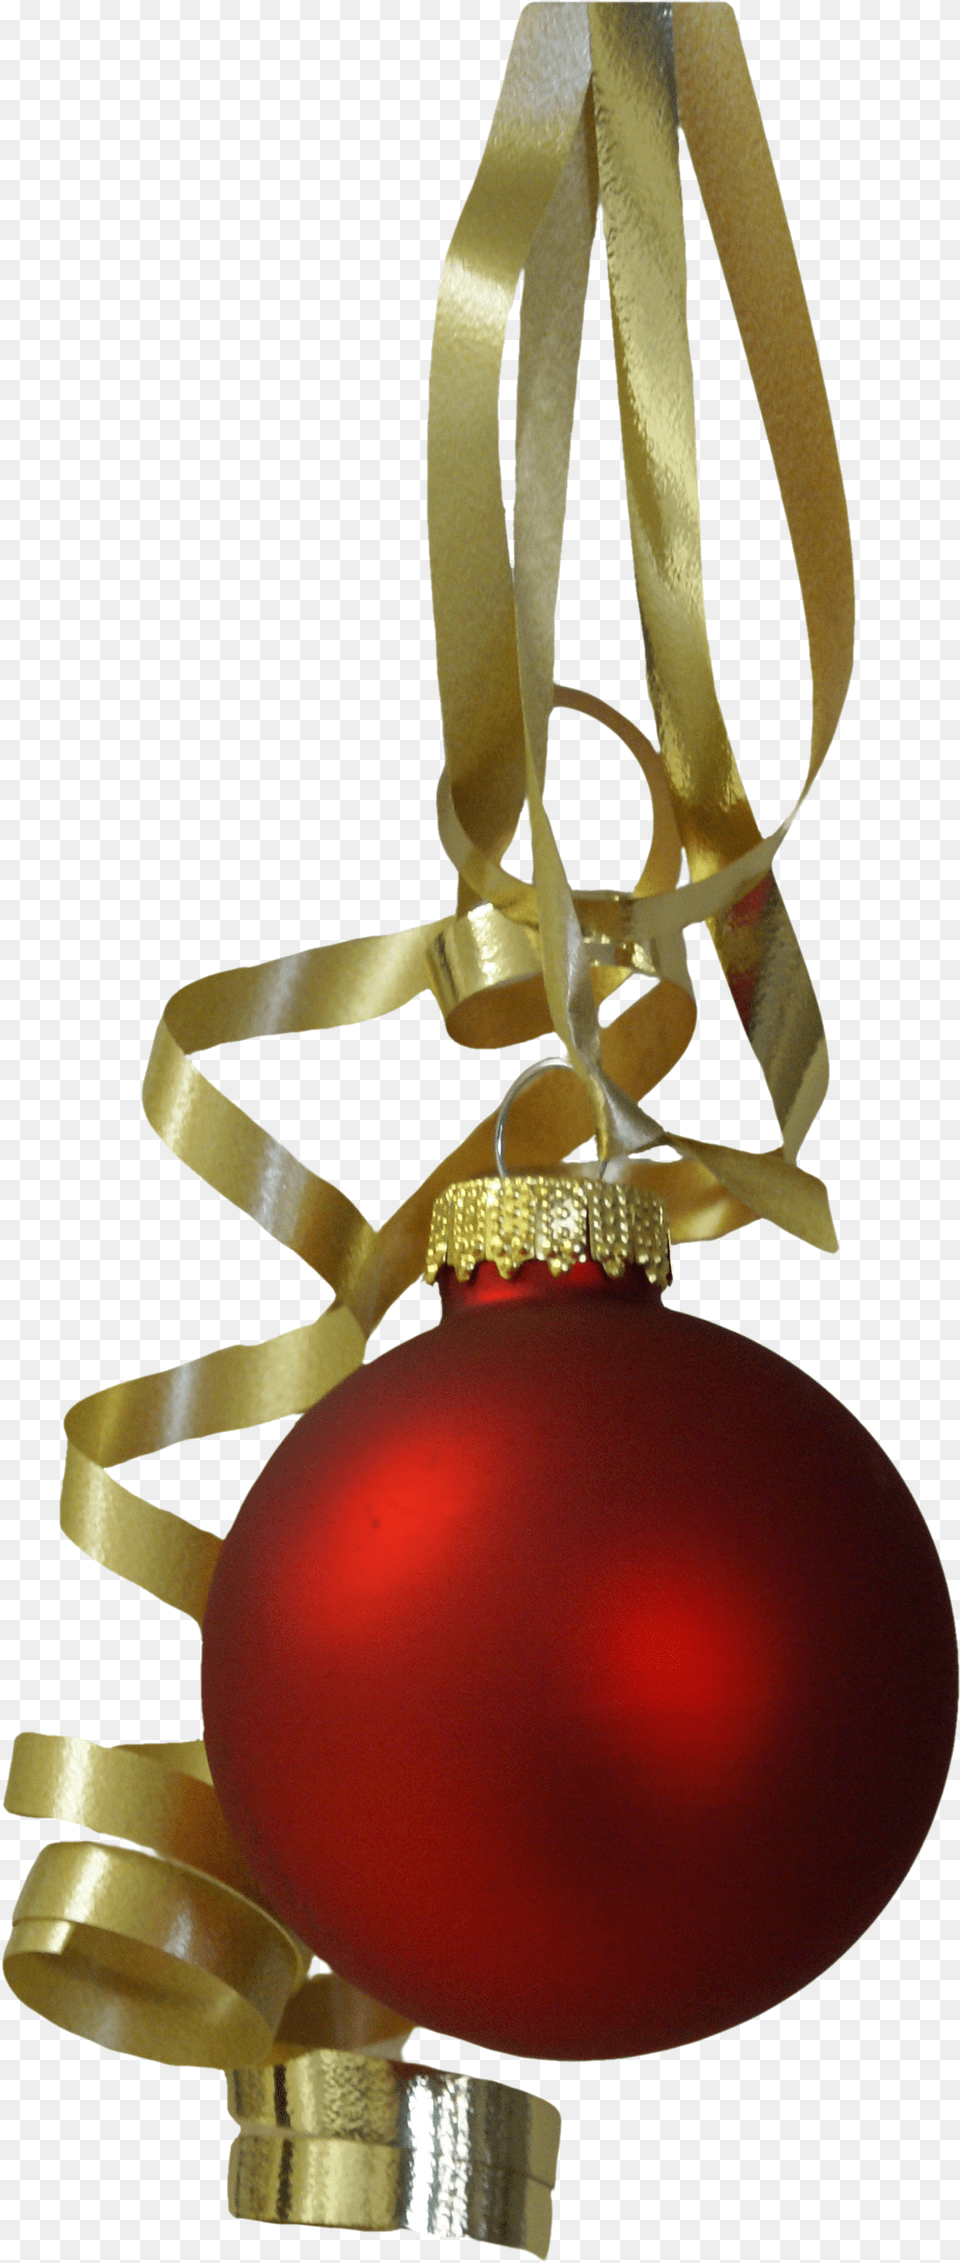 Christmas Ornaments Backgrounds Clip Ornaments And Ribbon, Accessories, Lighting, Ornament, Gold Free Png